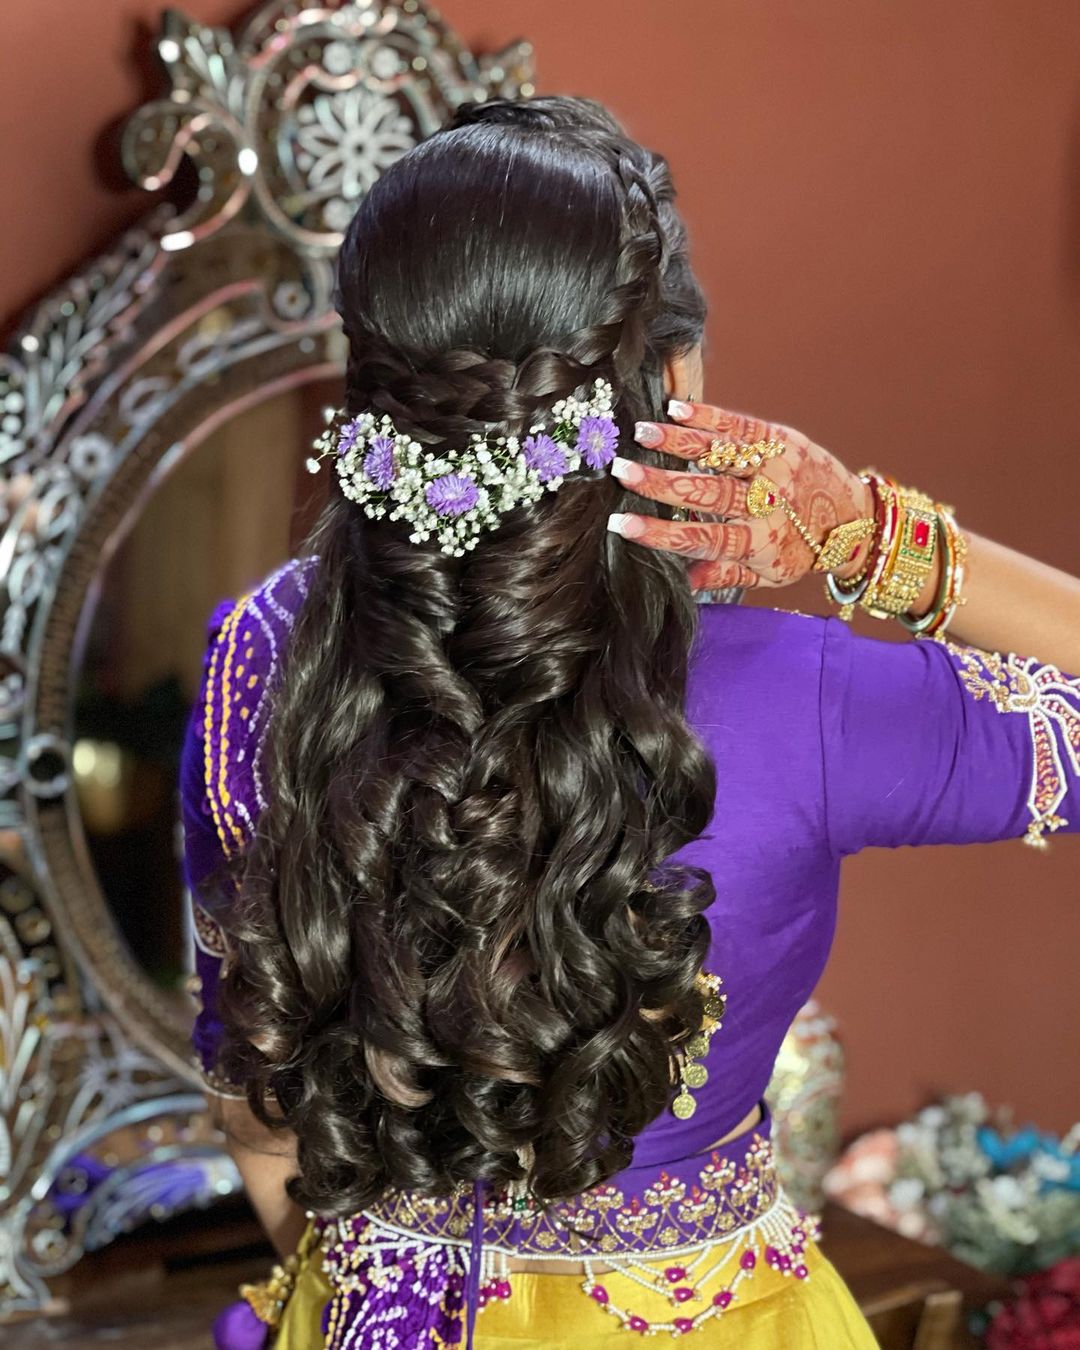 Bollywood Inspired Bridal Hairstyles For Your Wedding Looks